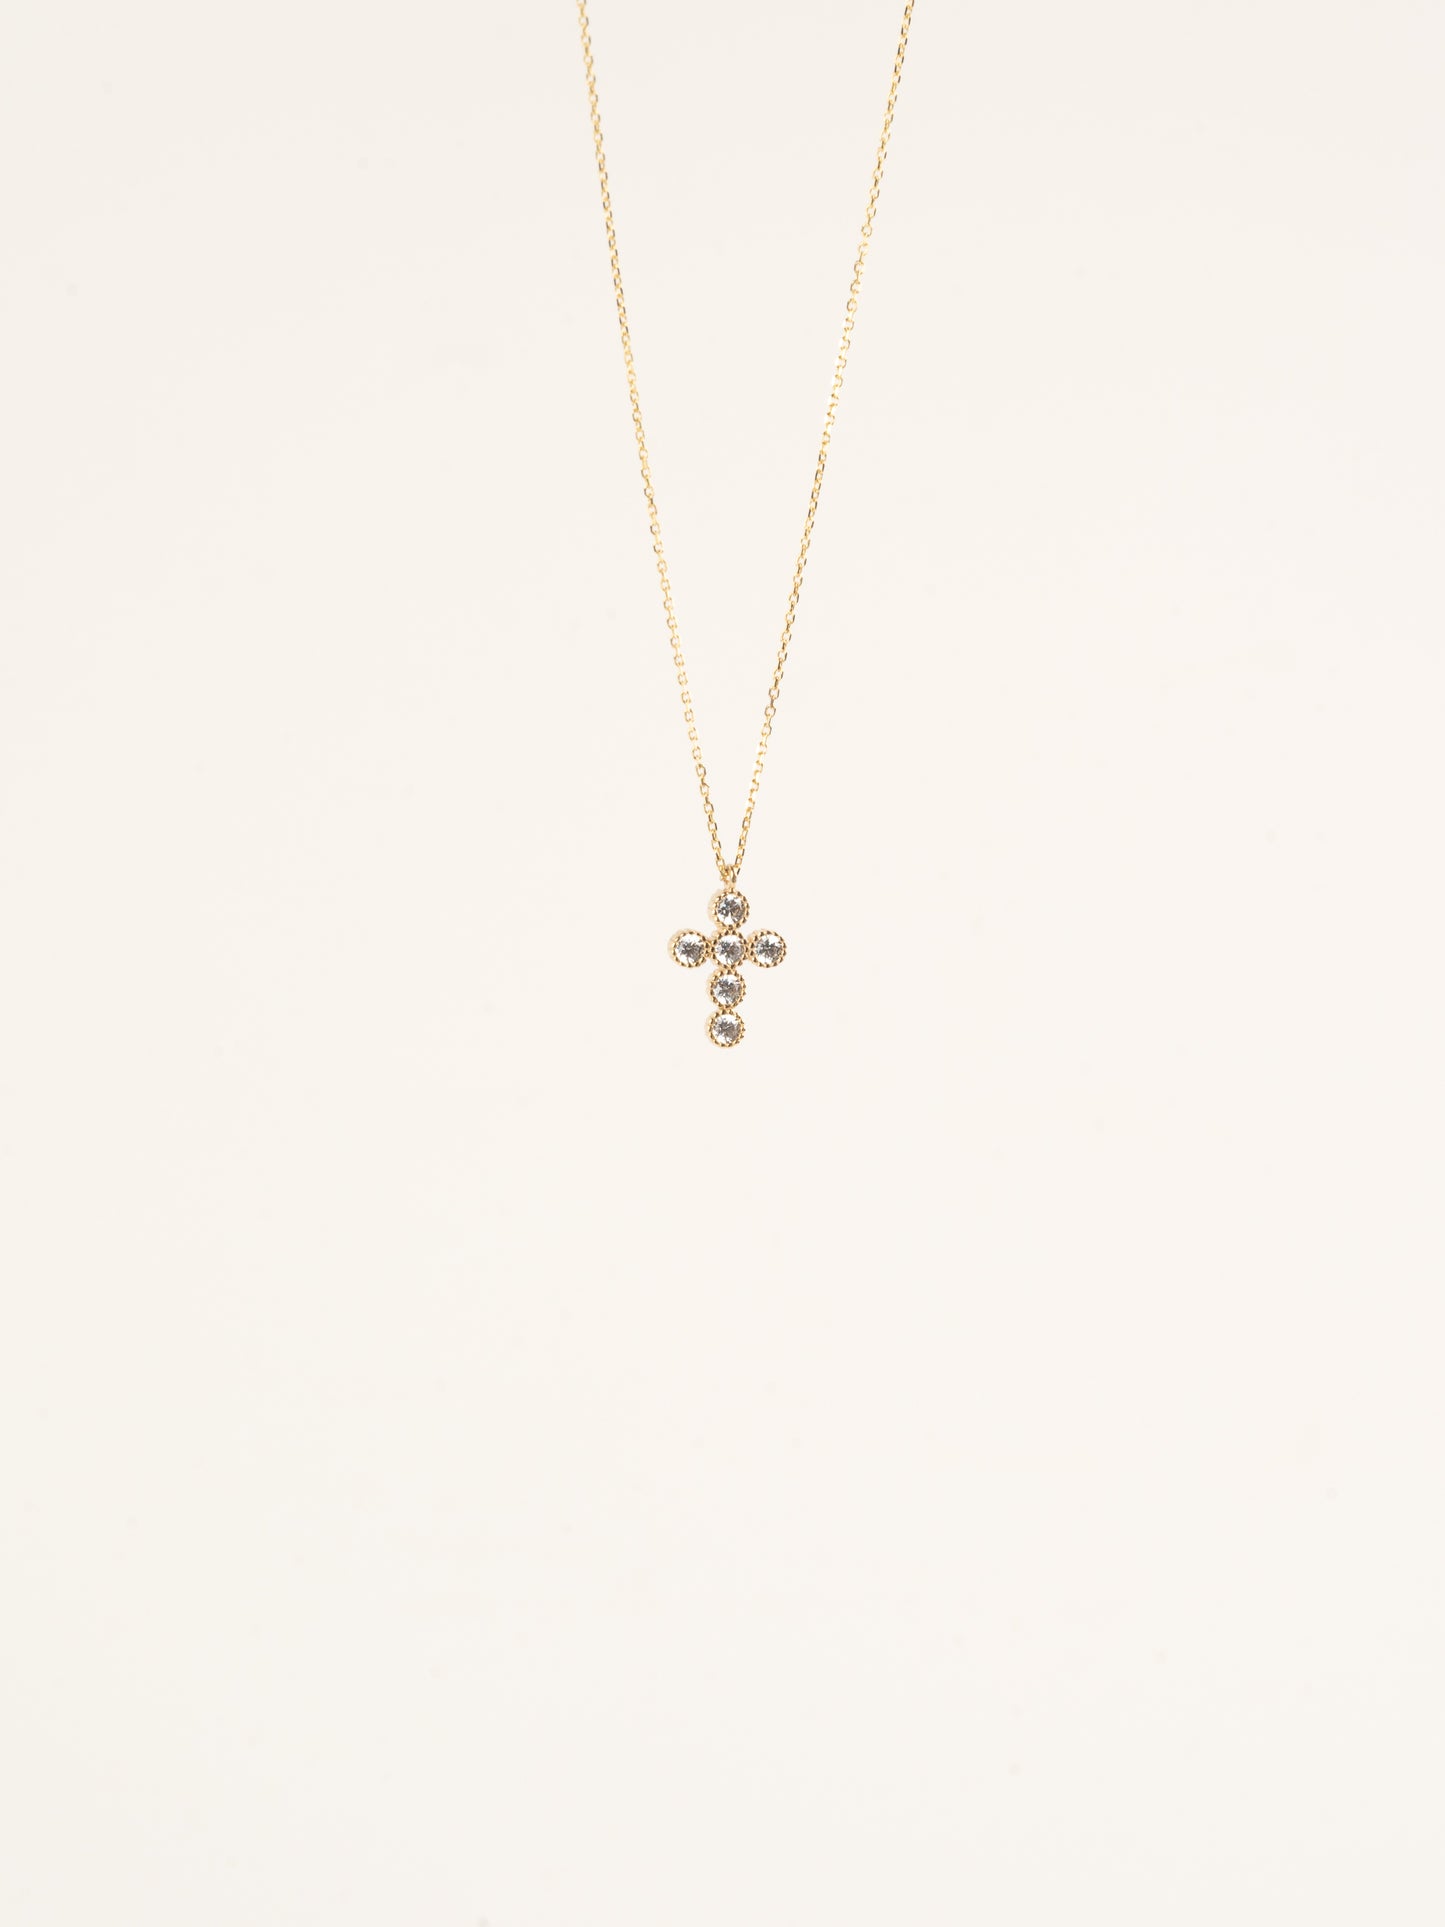 SOLID GOLD GRACE CROSS NECKLACE